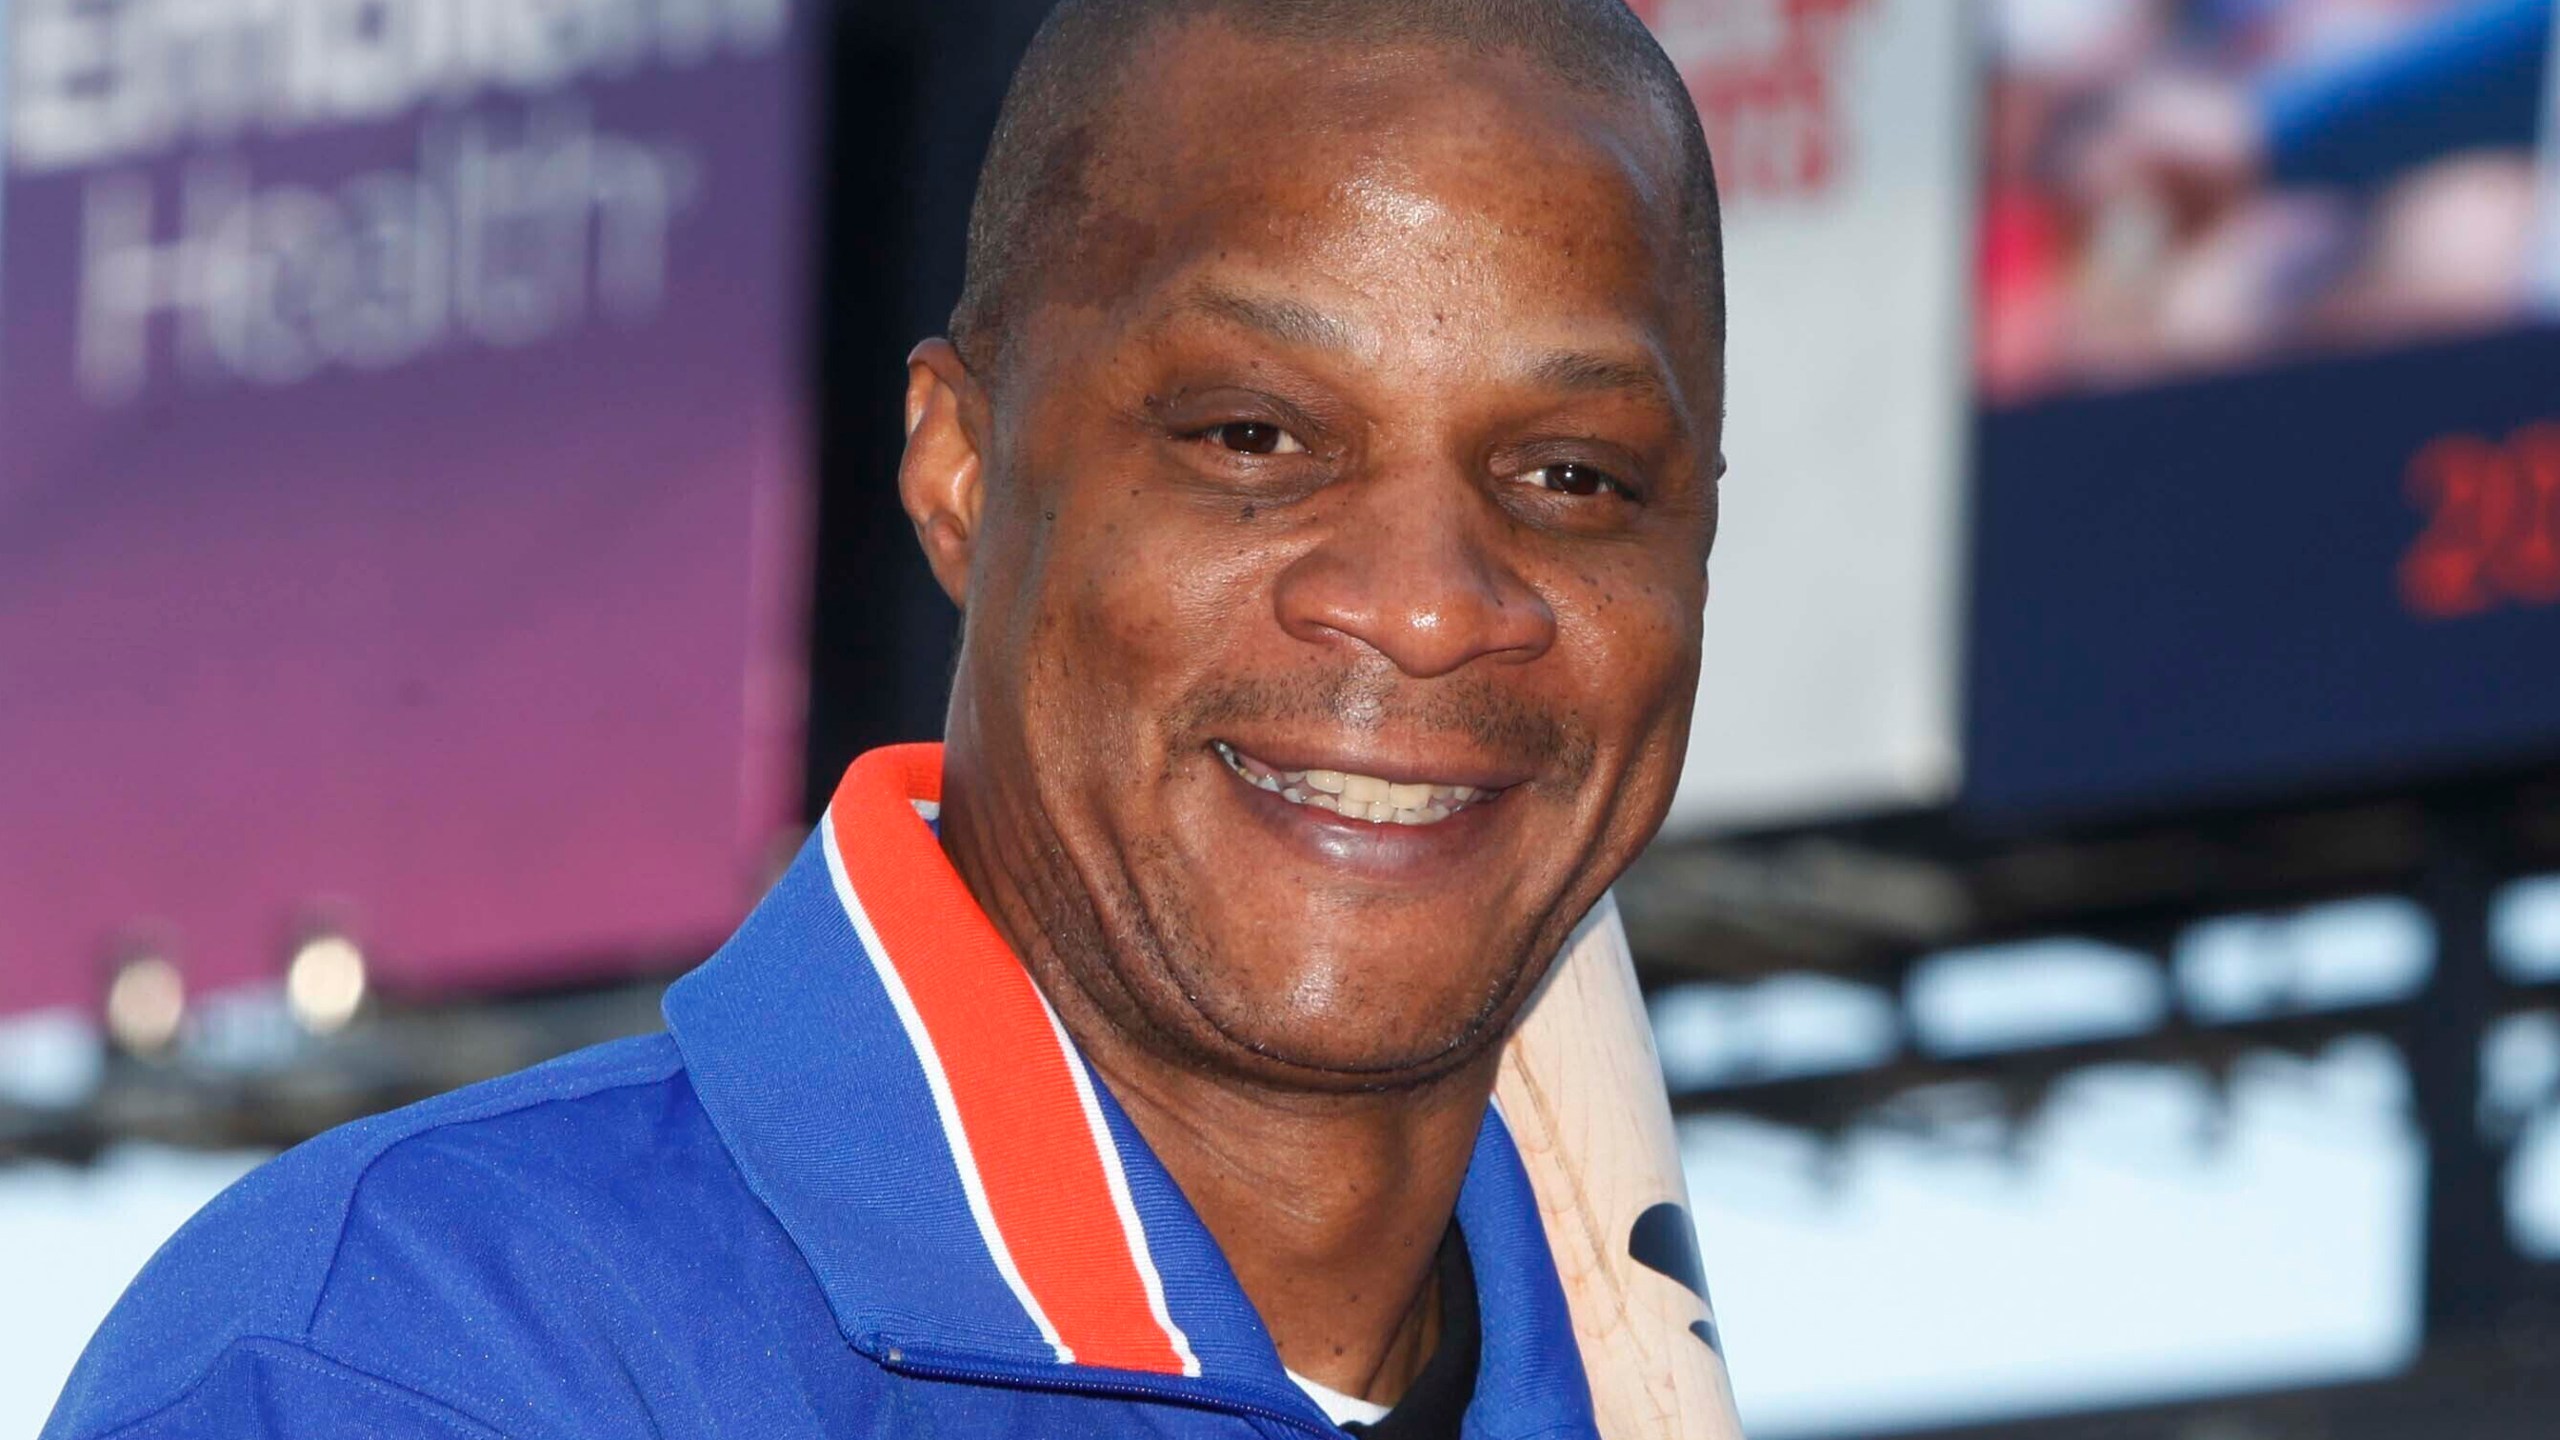 FILE - Former New York Mets baseball player Darryl Strawberry poses at Citi Field in New York Aug. 1, 2010. Former New York Mets and Yankees star Darryl Strawberry is recovering from a heart attack and is at SSM Health St. Joseph Hospital. Mets spokesman Jay Horwitz said Tuesday, March 12, 2024, that Strawberry was stricken Monday, a day before the eight-time All-Star's 62nd birthday. (AP Photo/Seth Wenig, File)